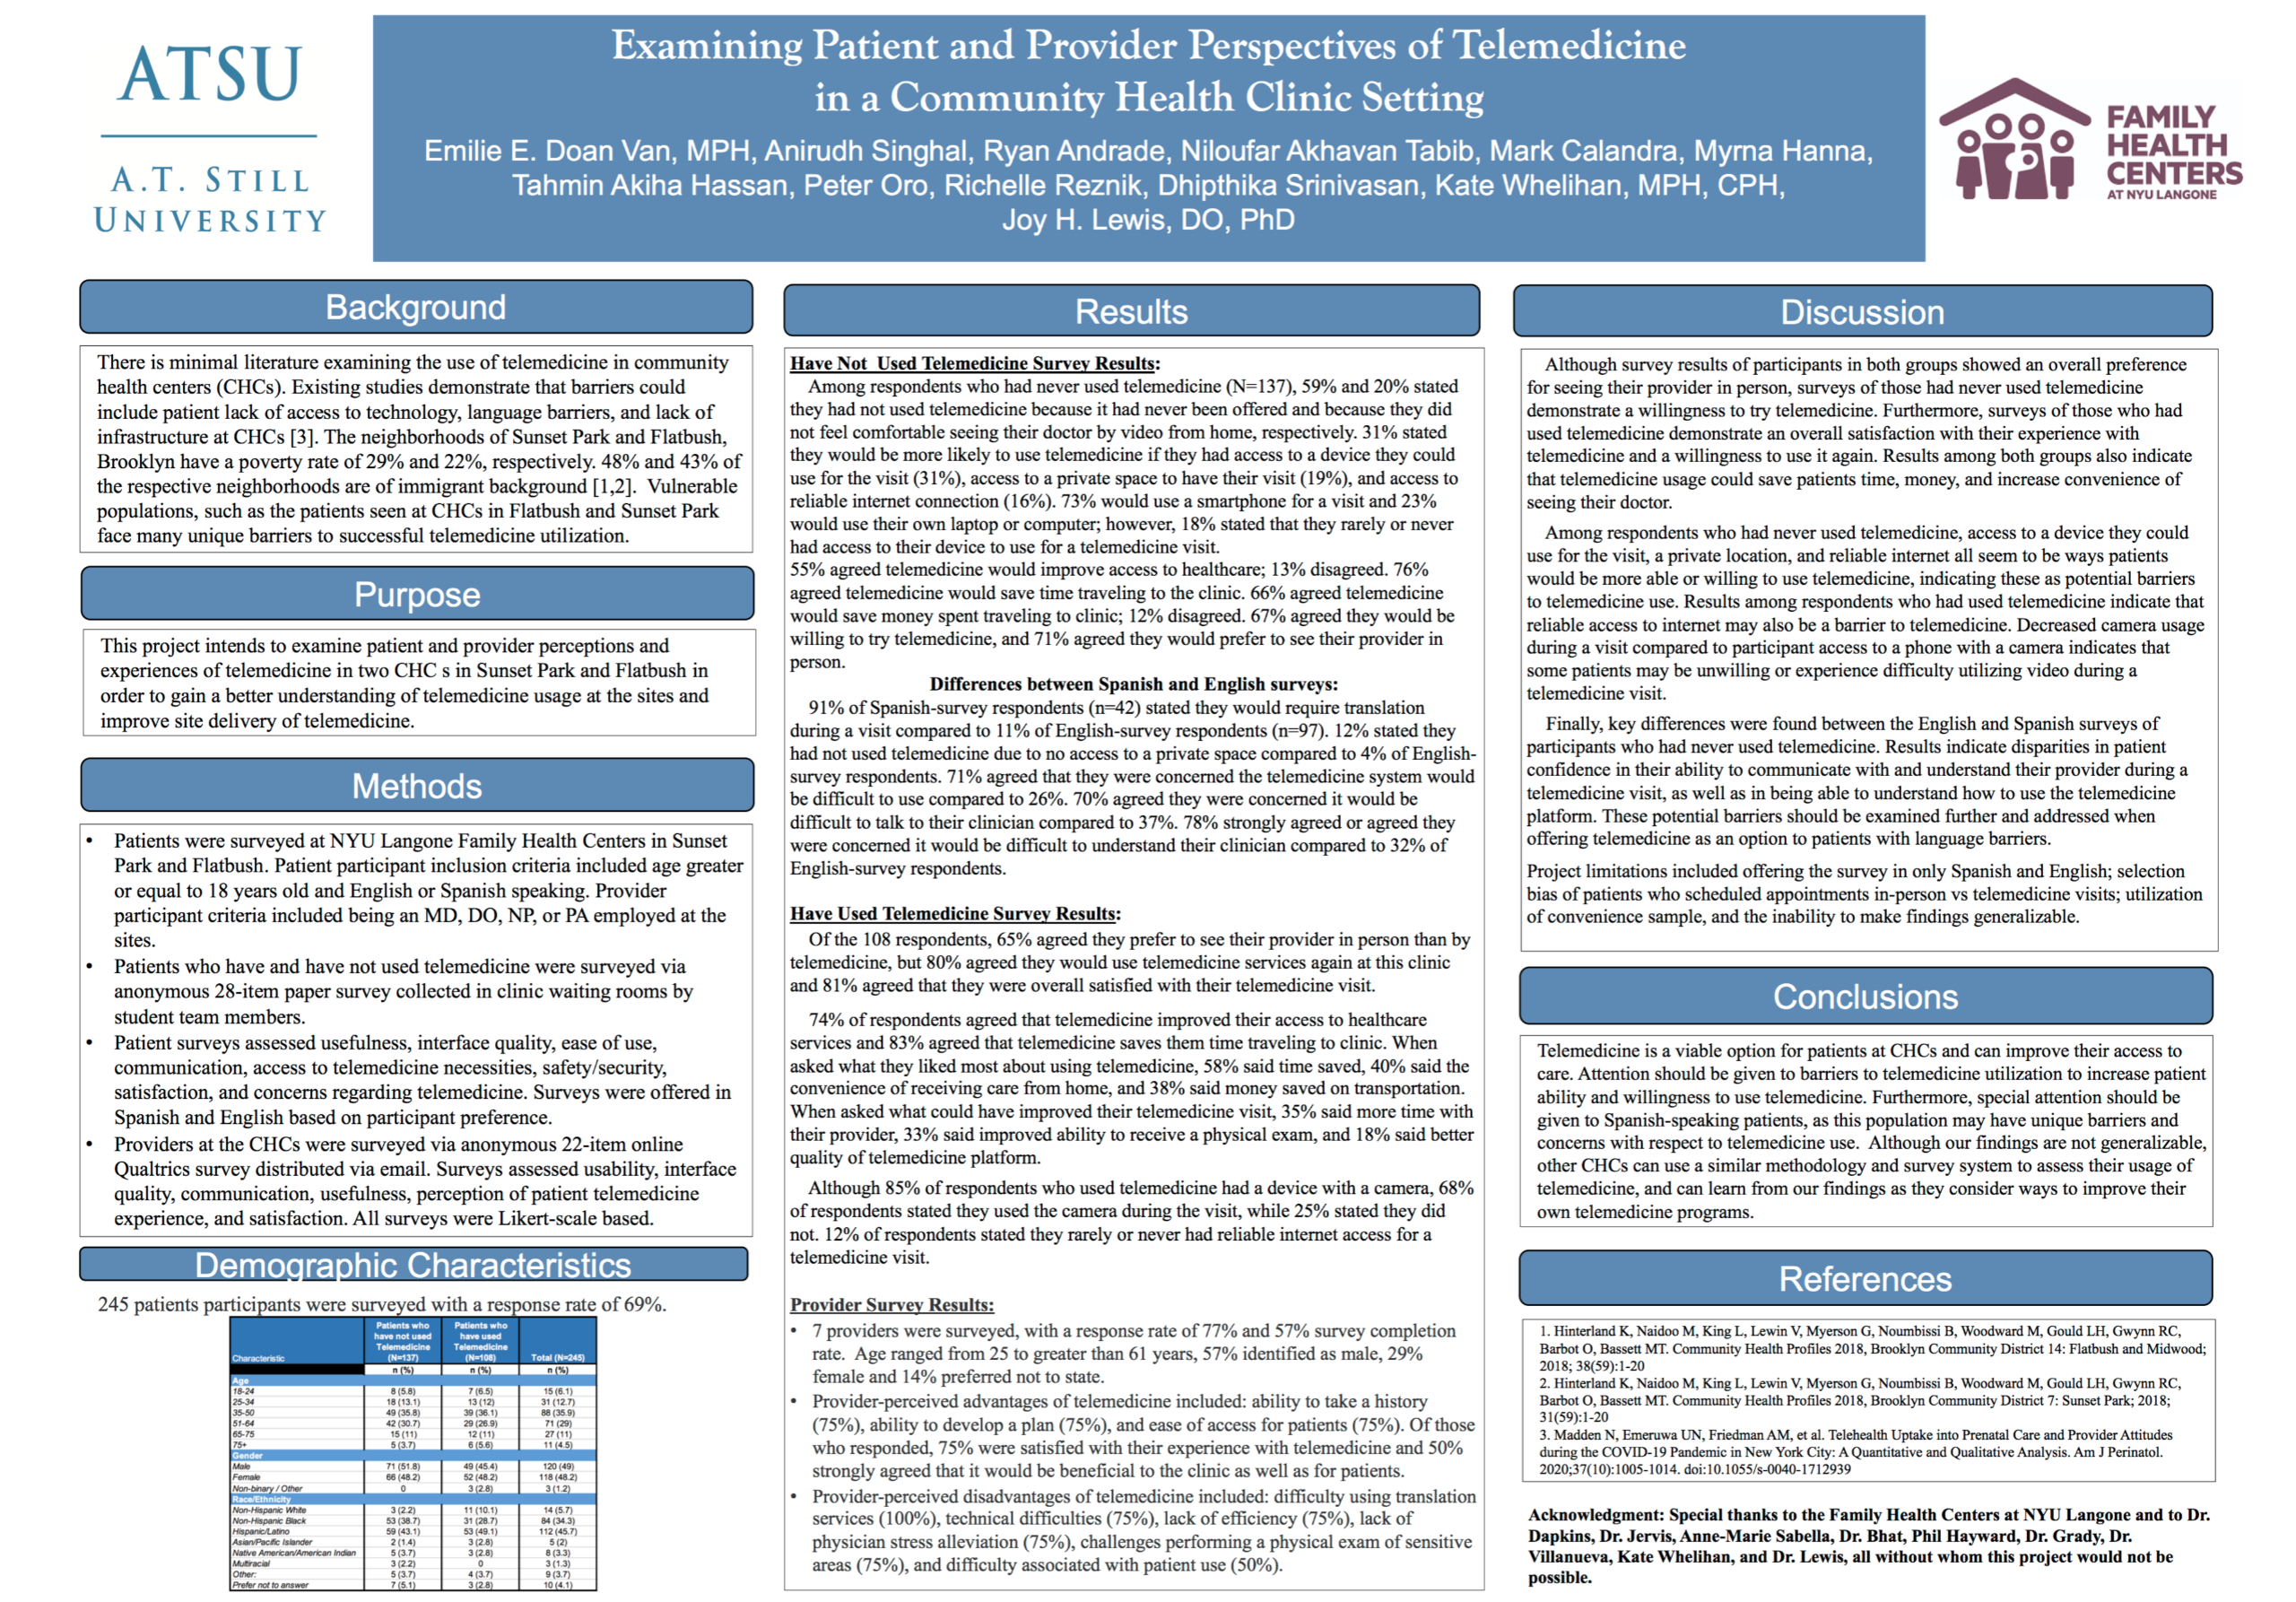 Examining Patient and Provider Perspectives of Telemedicine in a Community Health Clinic Setting icon